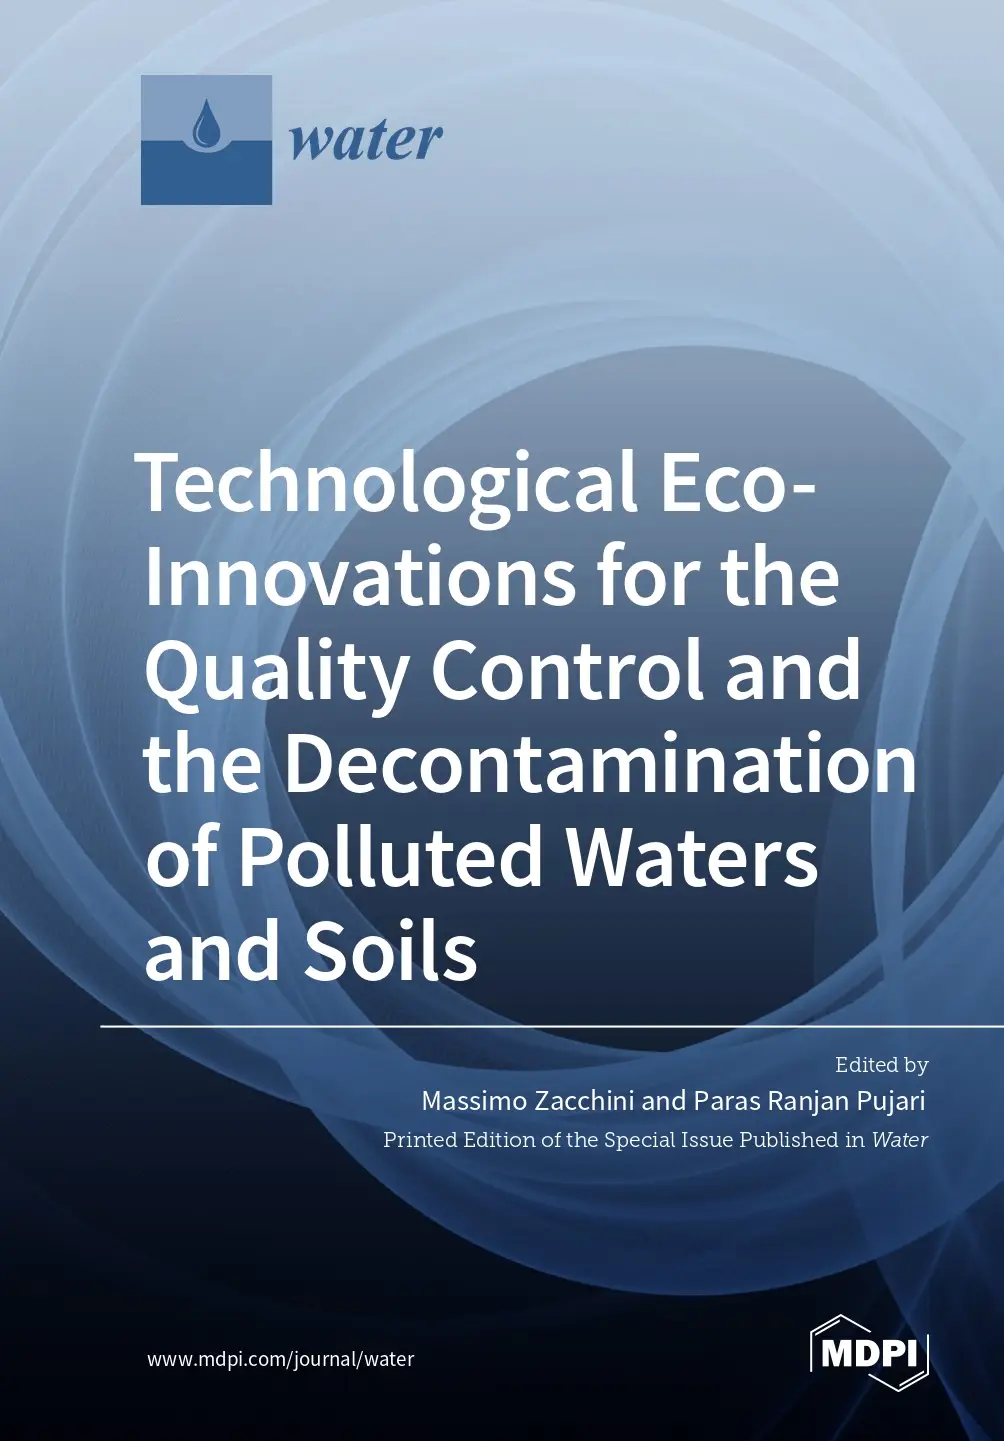 Technological Eco- Innovations for the Quality Control and the Decontamination of Polluted Waters and Soils